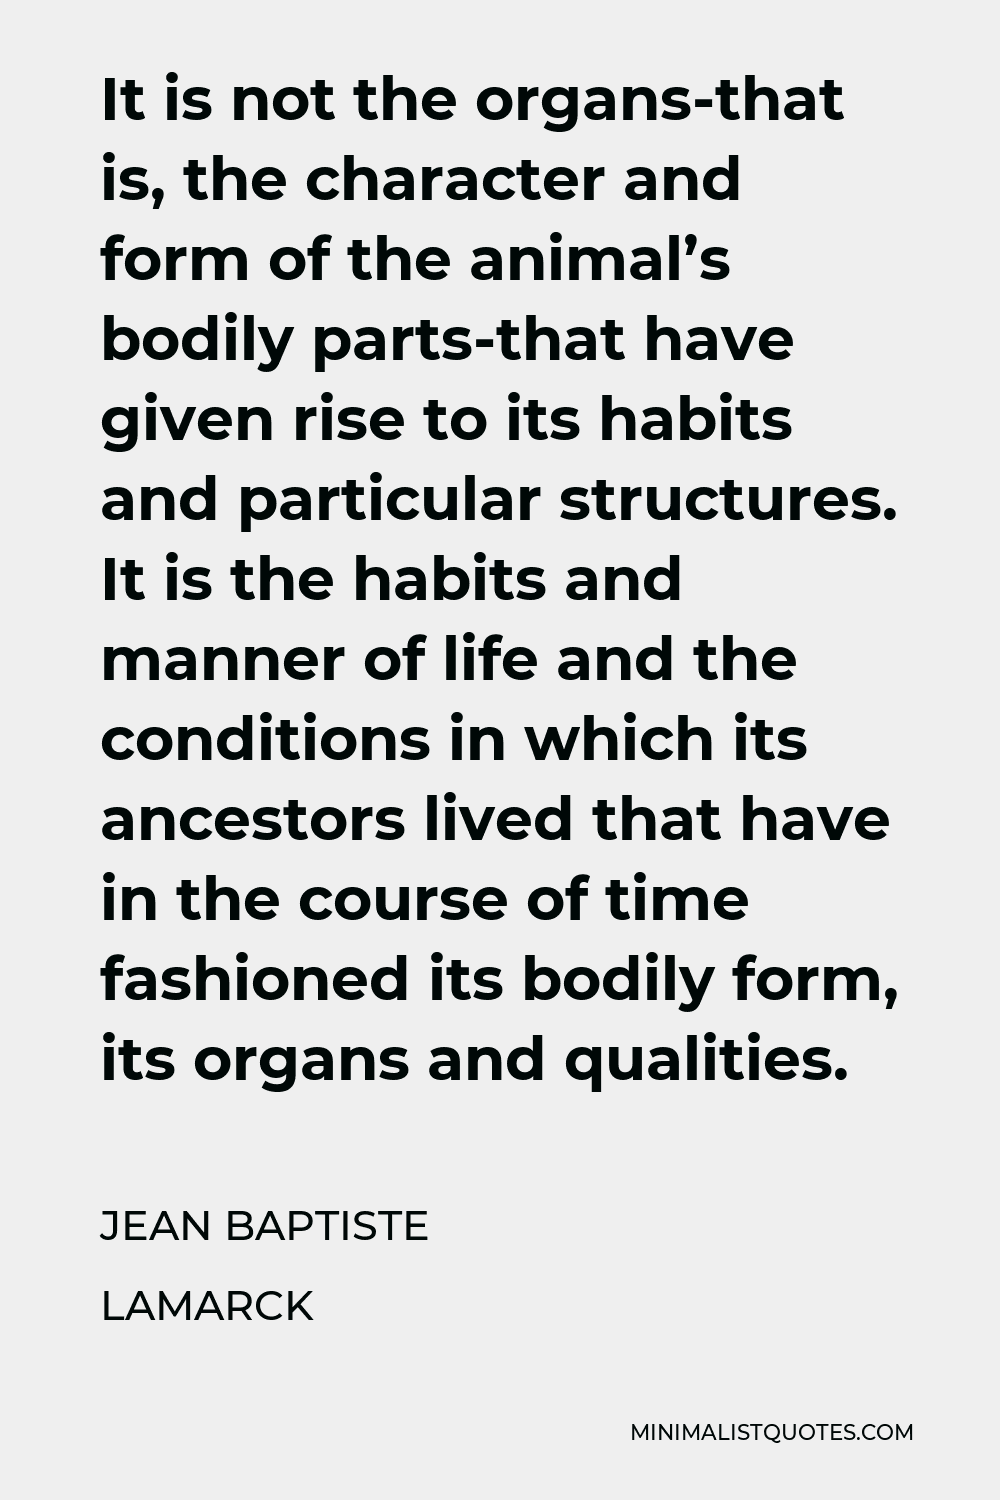 Jean Baptiste Lamarck Quote - It is not the organs-that is, the character and form of the animal’s bodily parts-that have given rise to its habits and particular structures. It is the habits and manner of life and the conditions in which its ancestors lived that have in the course of time fashioned its bodily form, its organs and qualities.